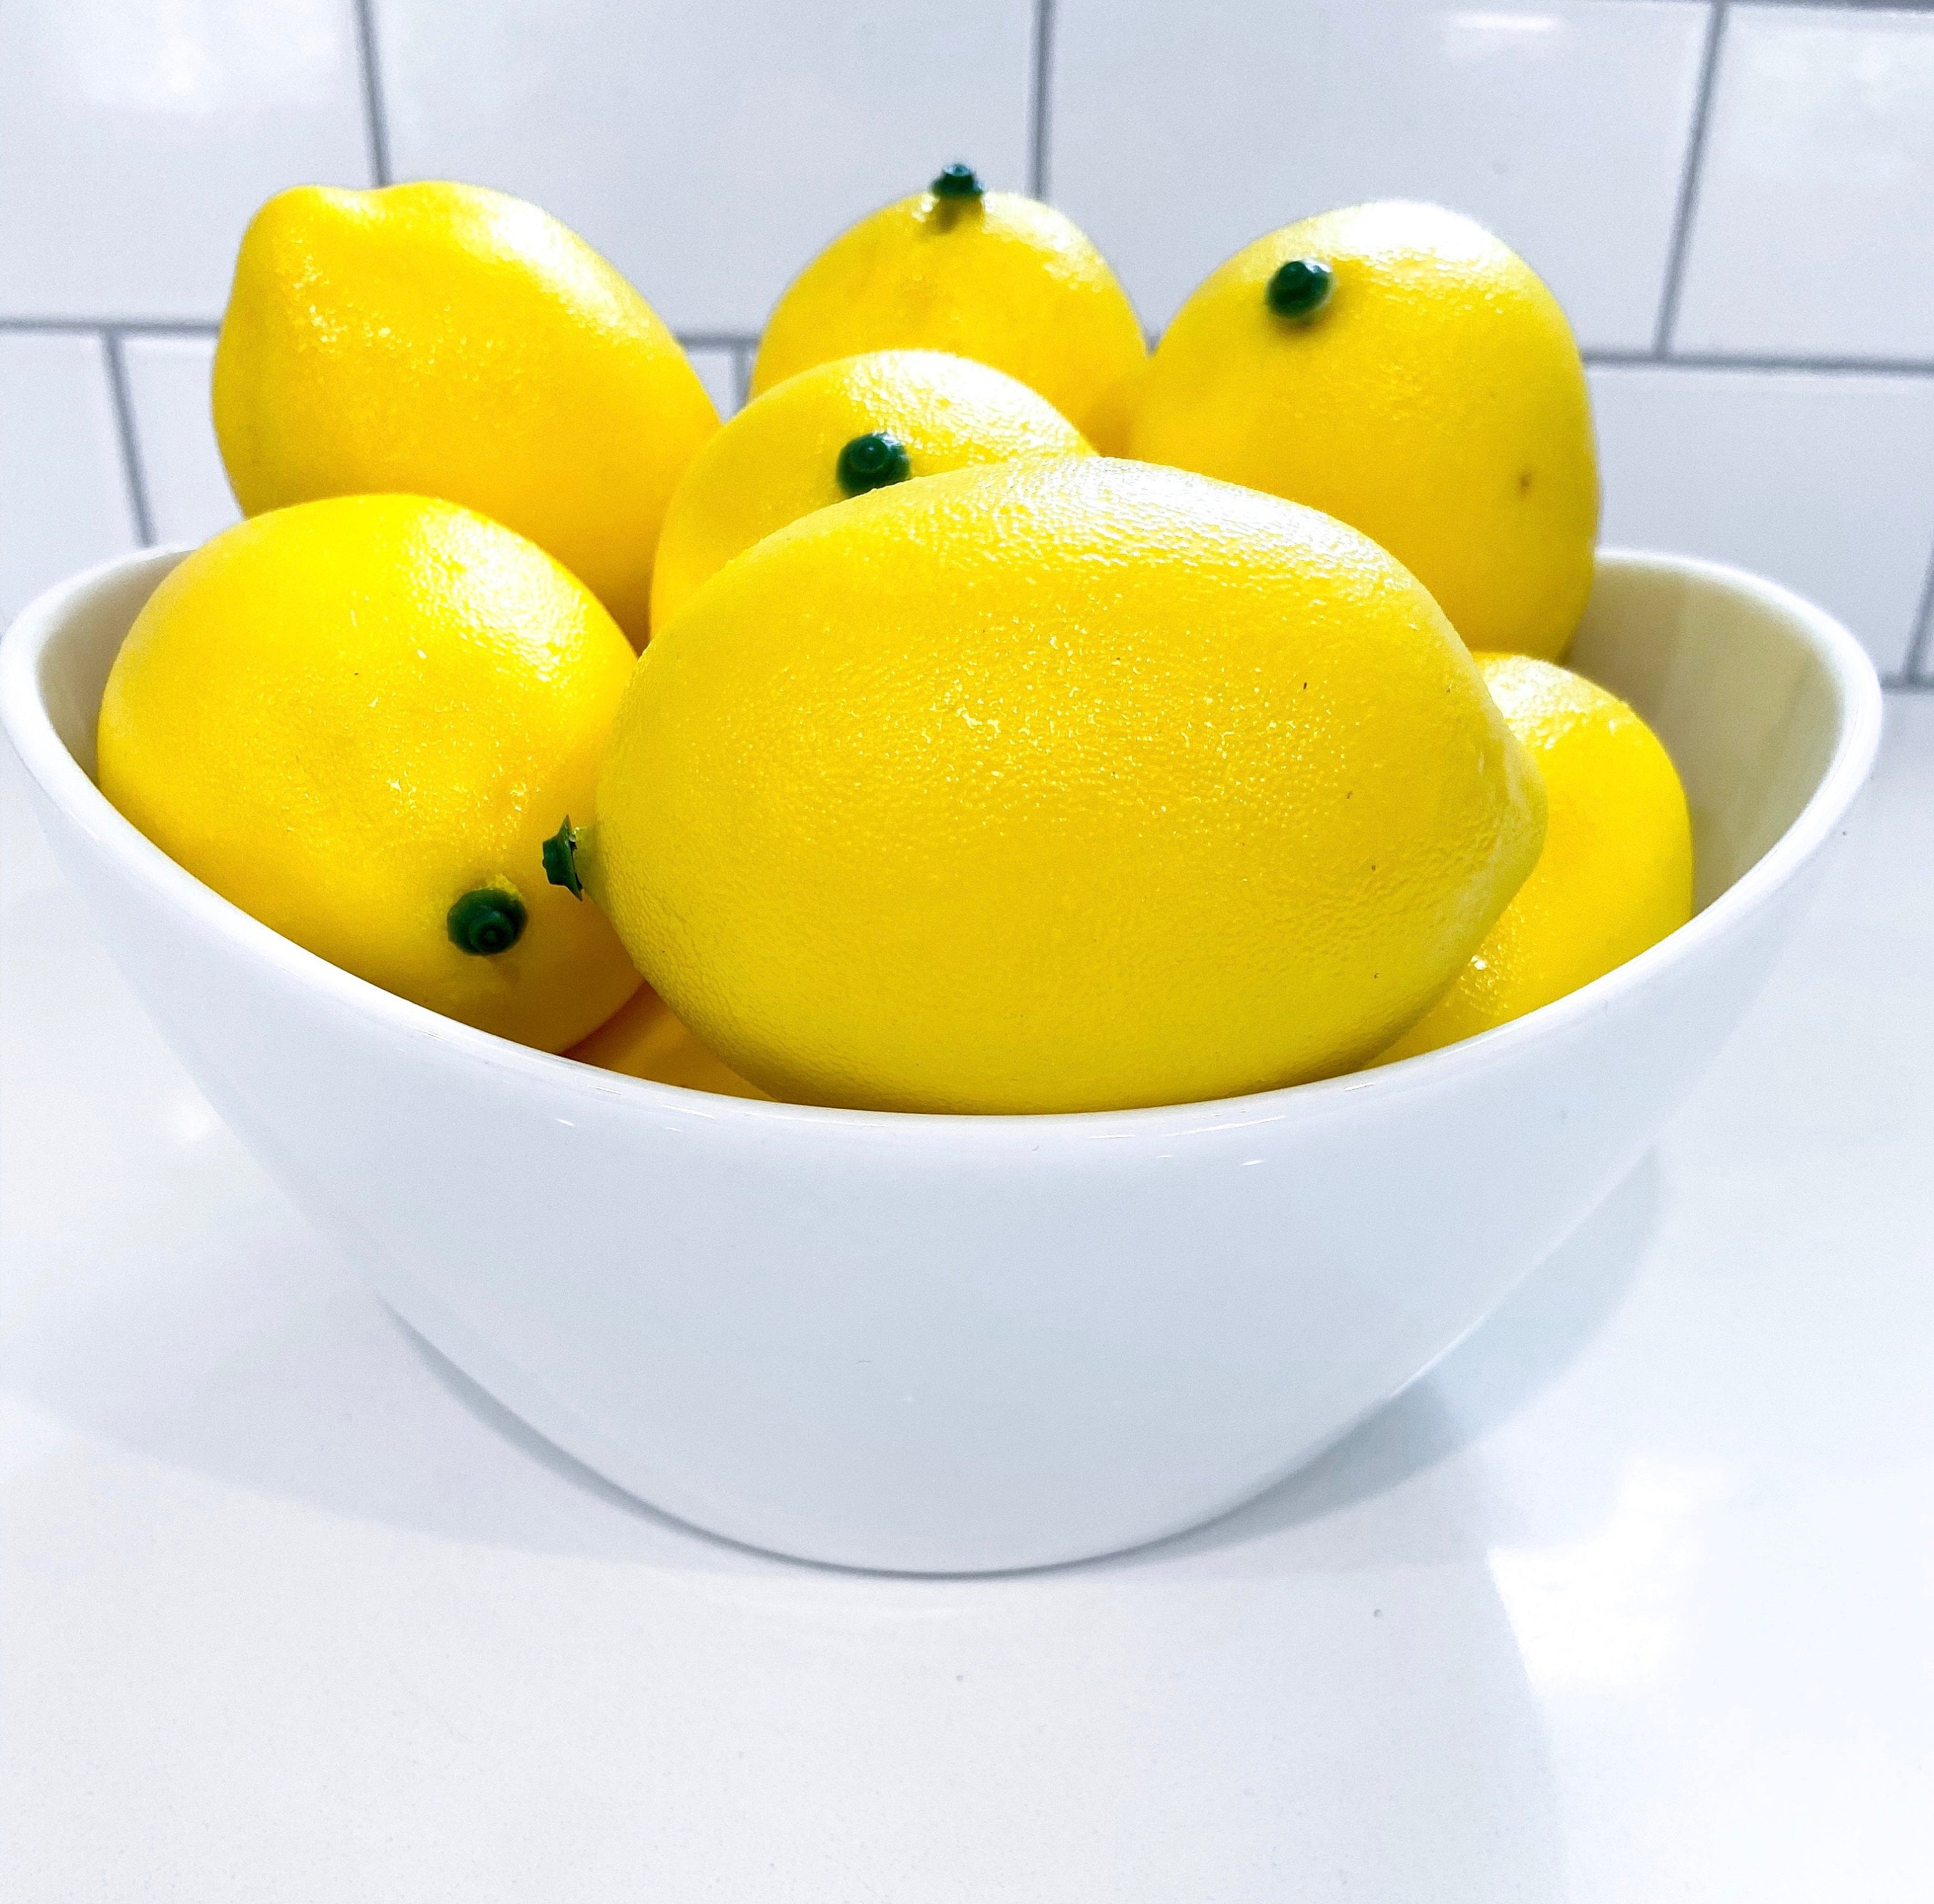 Insten 12 Pack Artificial Fake Lemons And Limes, Faux Fruit : Target